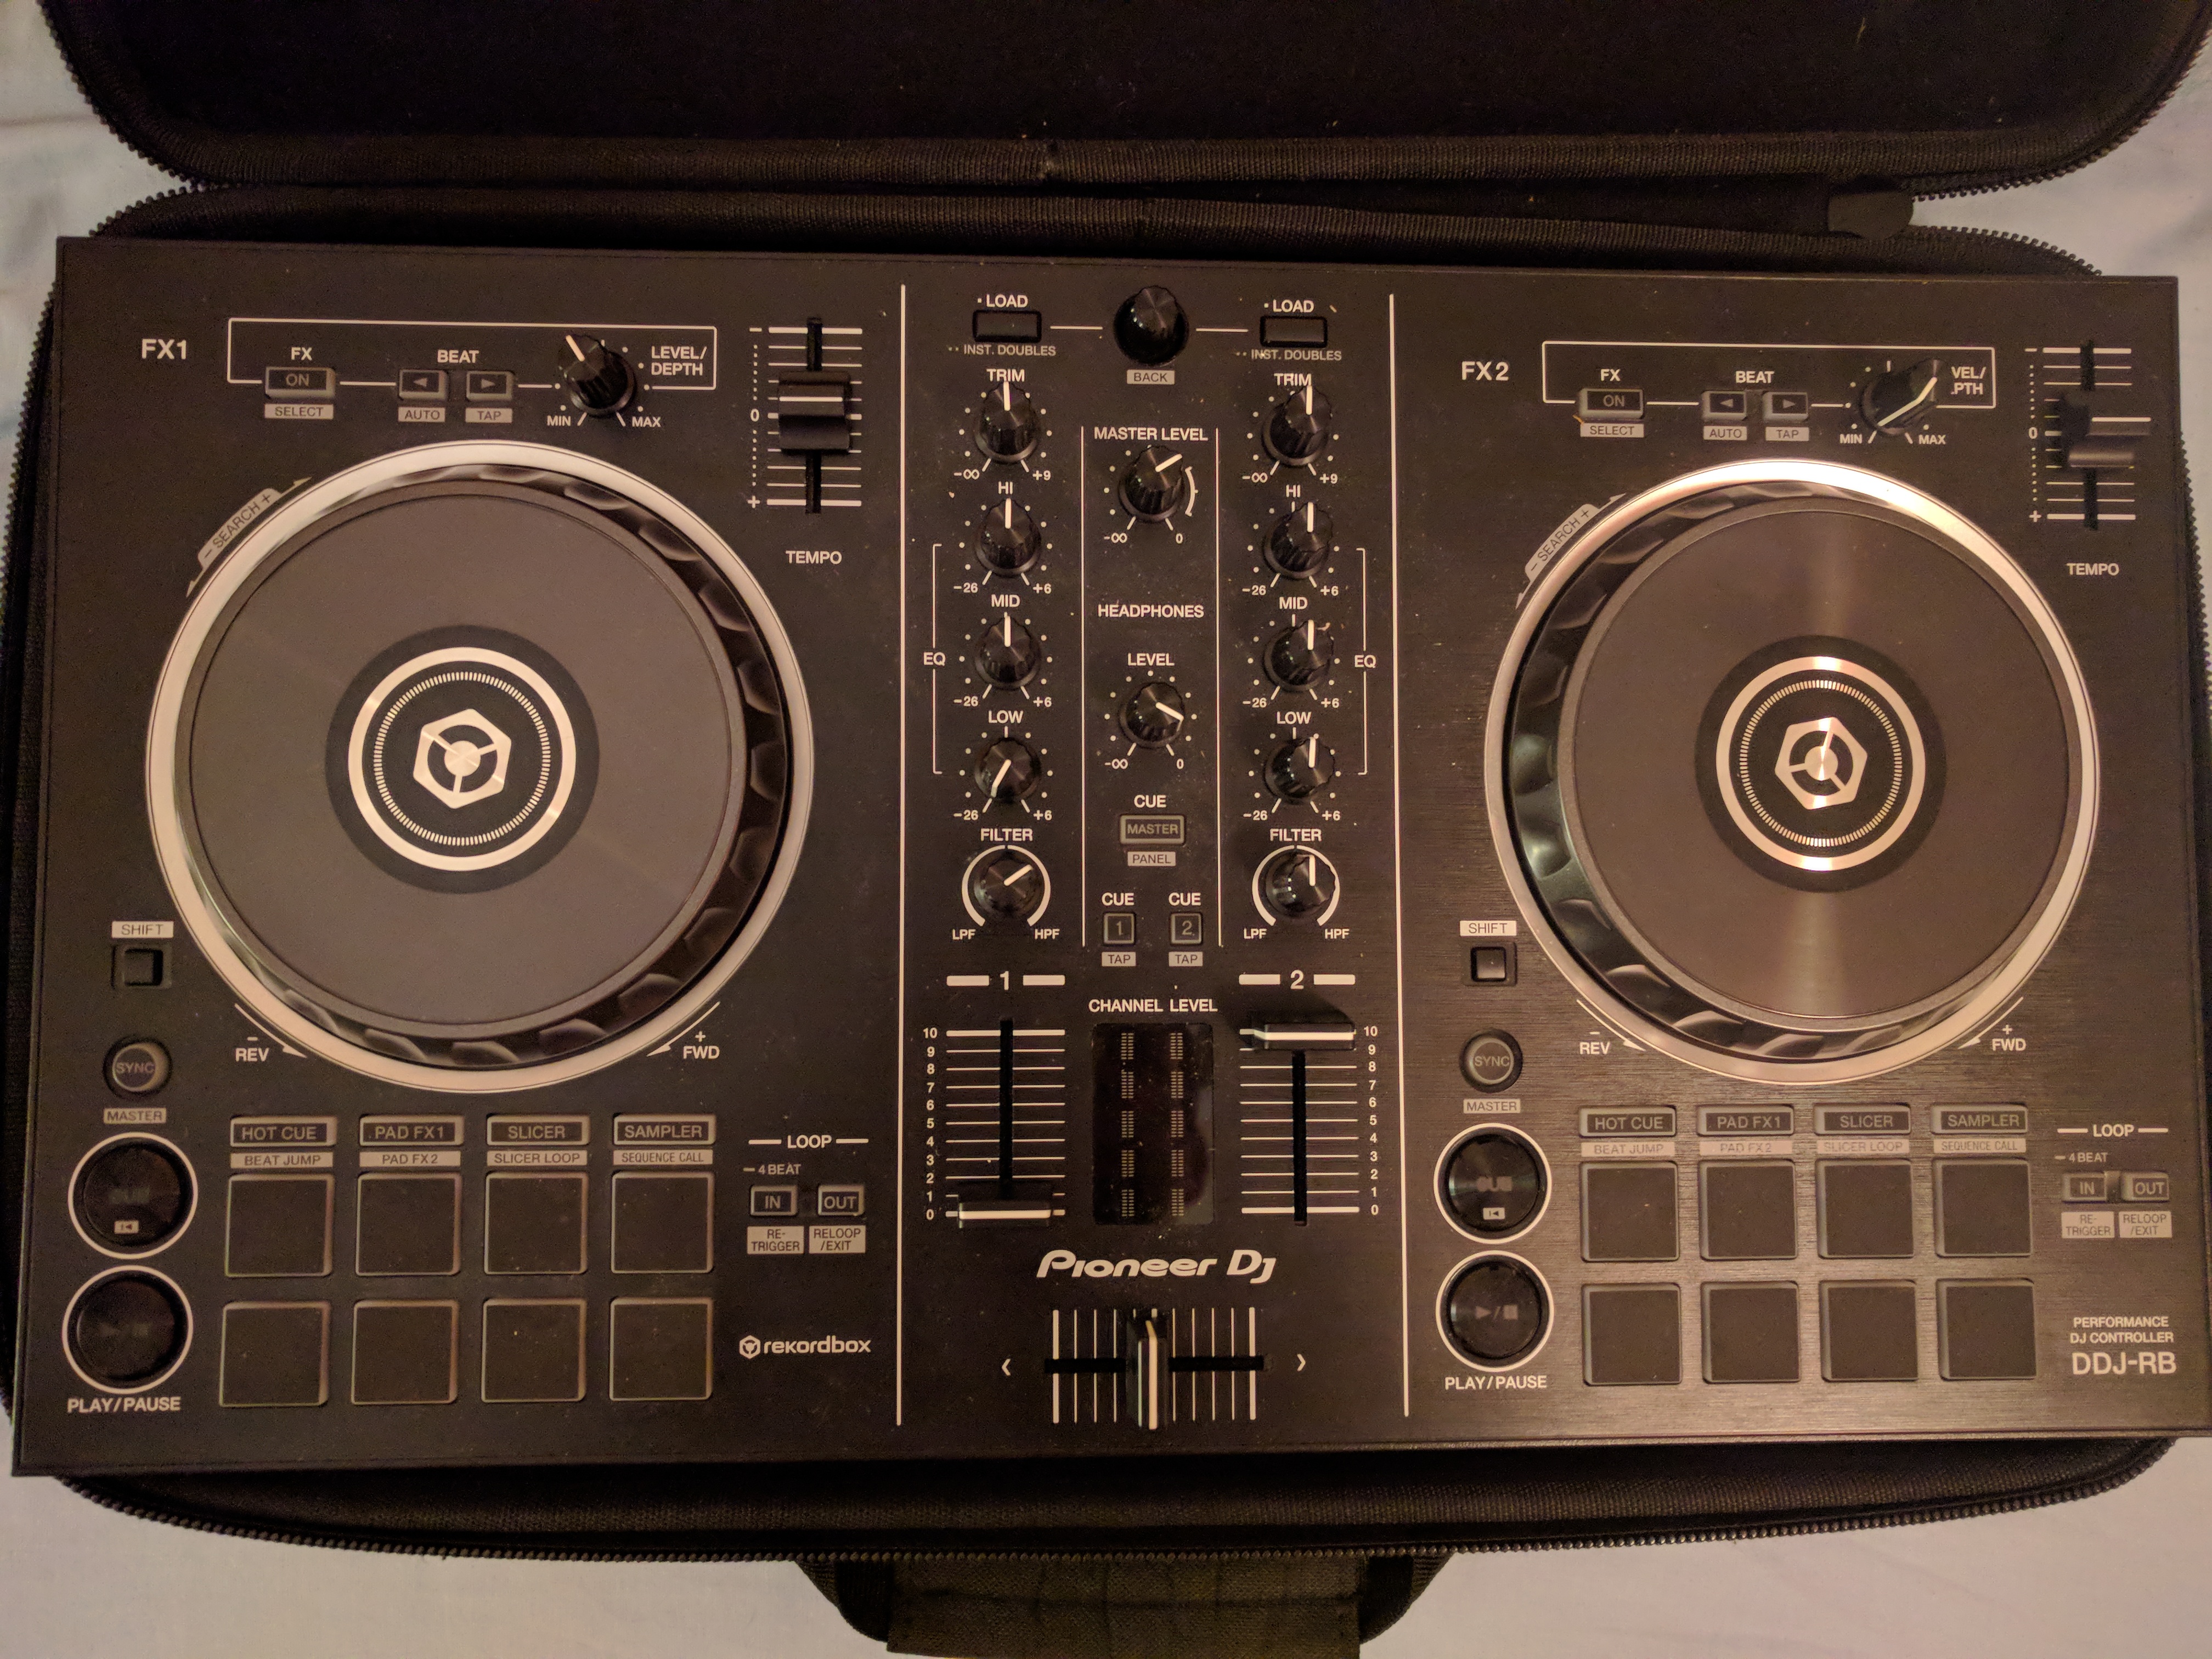 how to use ddj rb with traktor